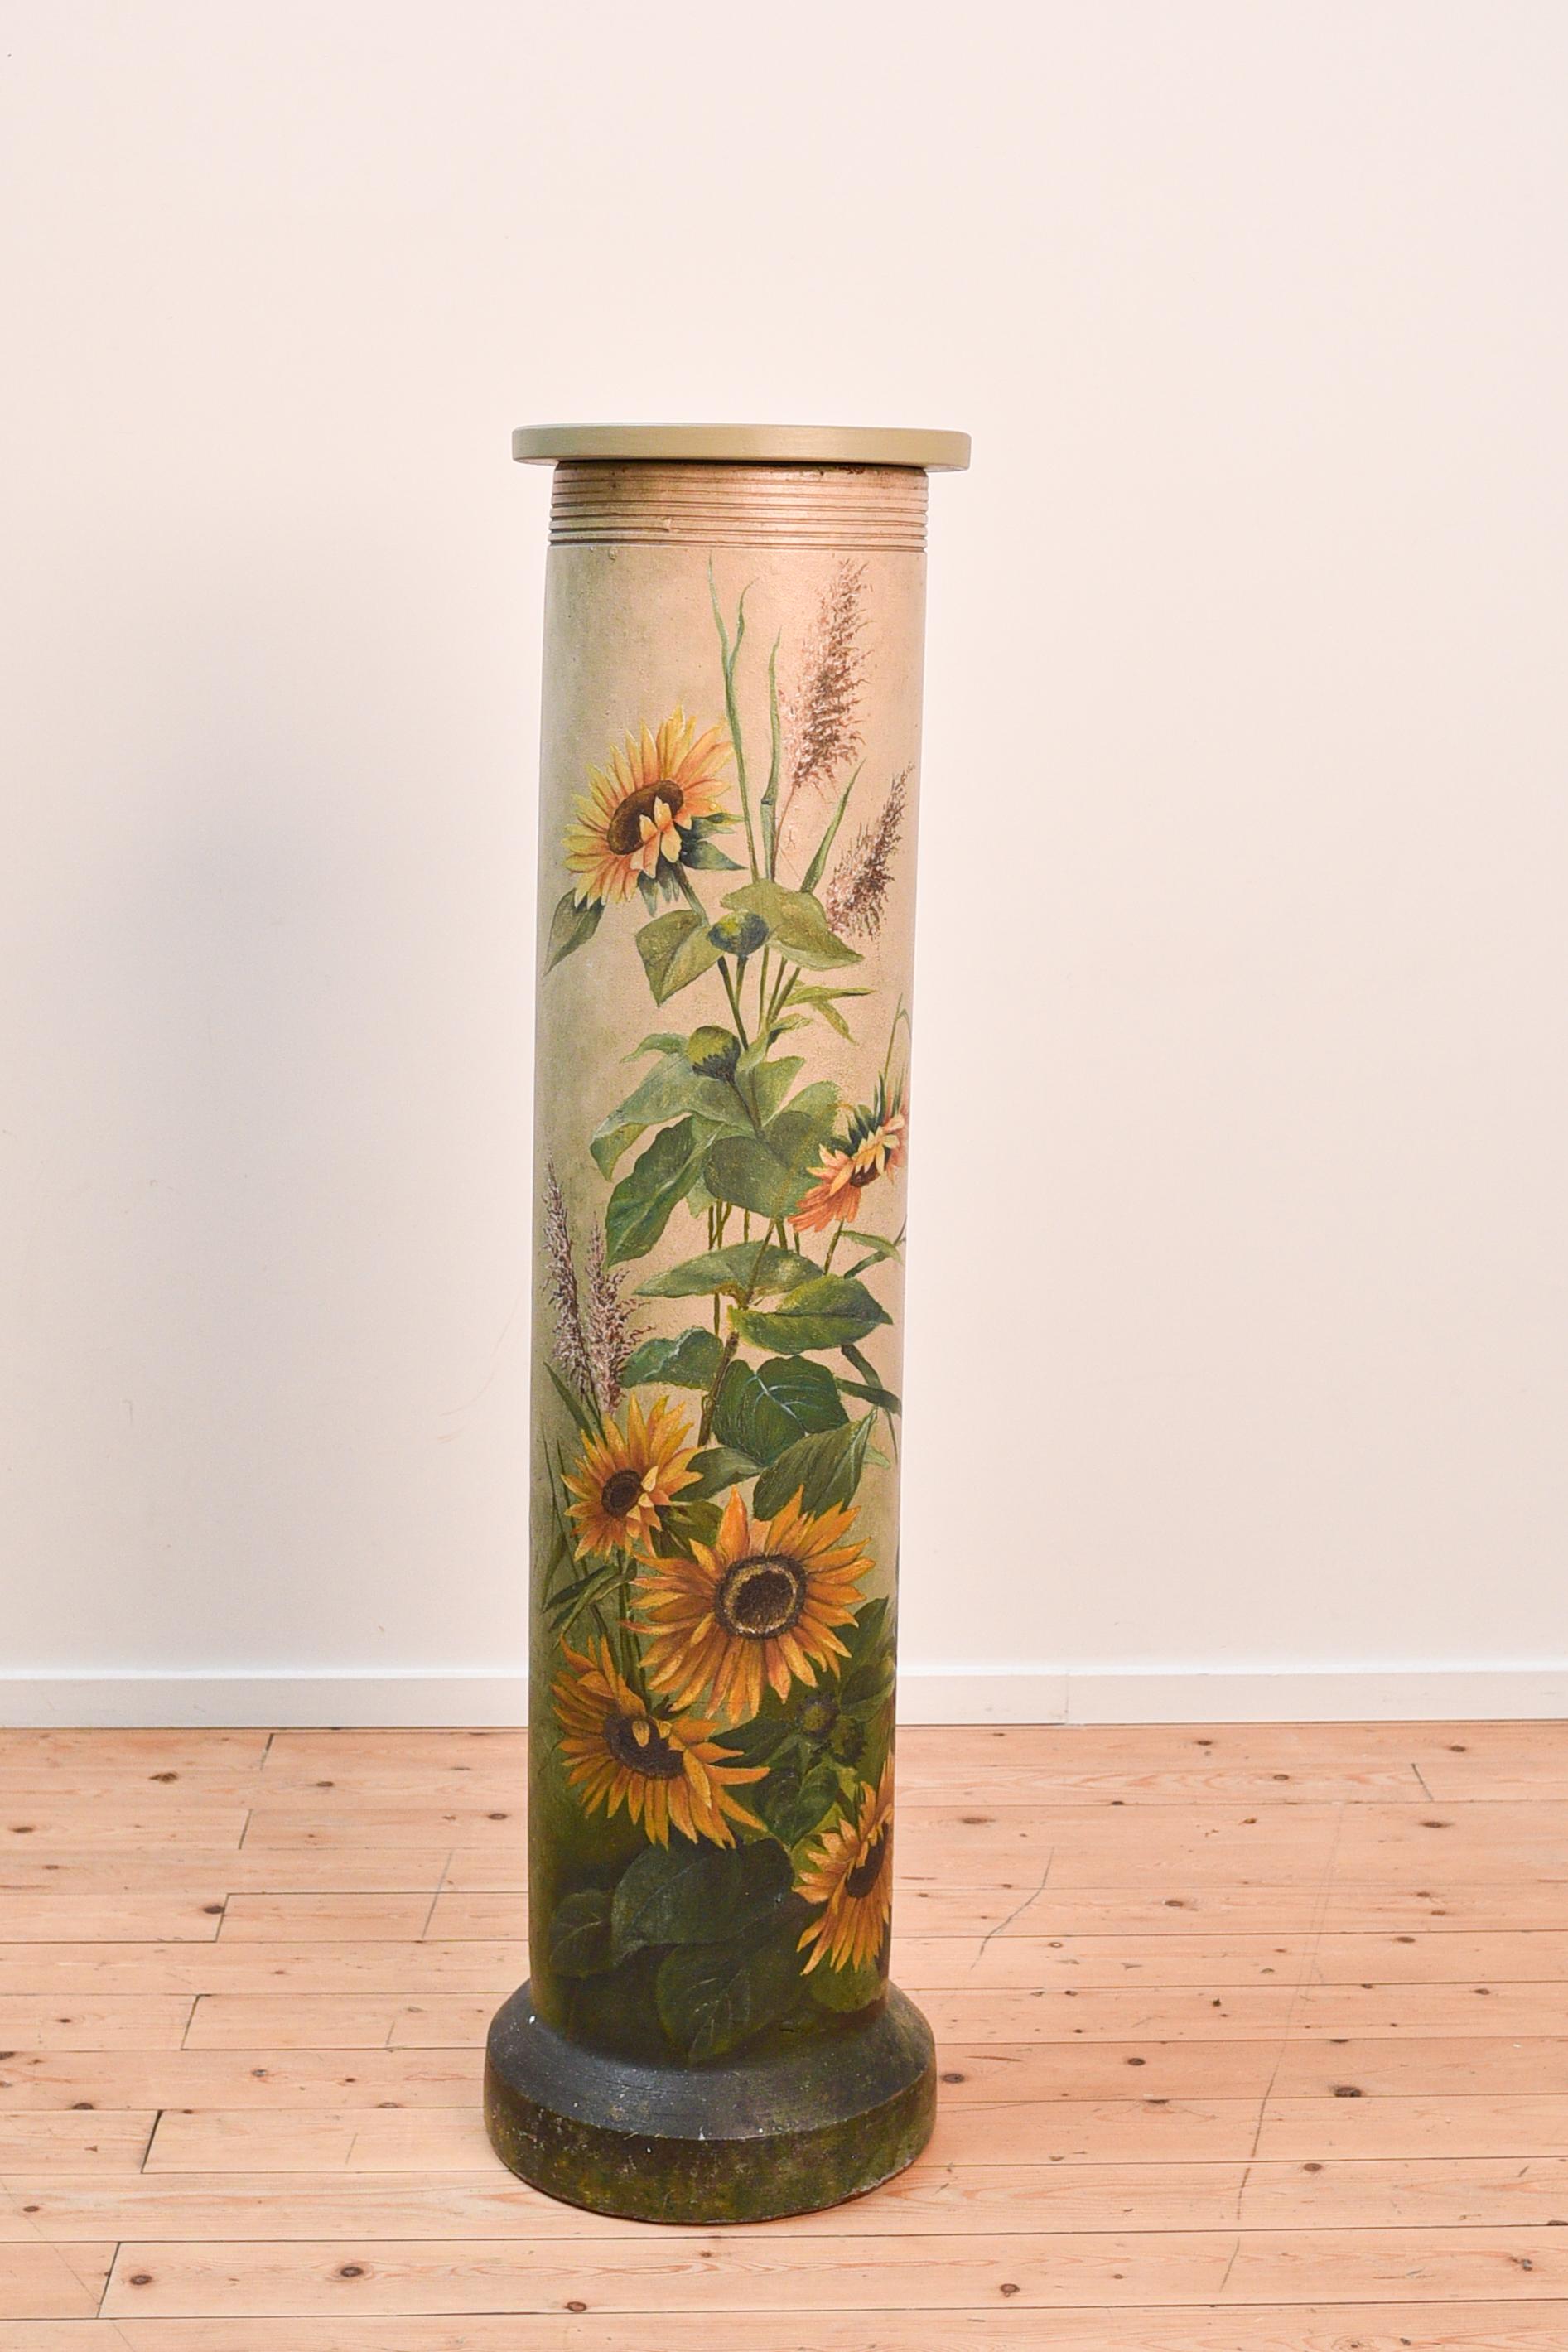 The hand-painted hollow column is decorated with sunflowers. Thanks to the removable top in wood the column can serve as a plant stand or art presentation column.